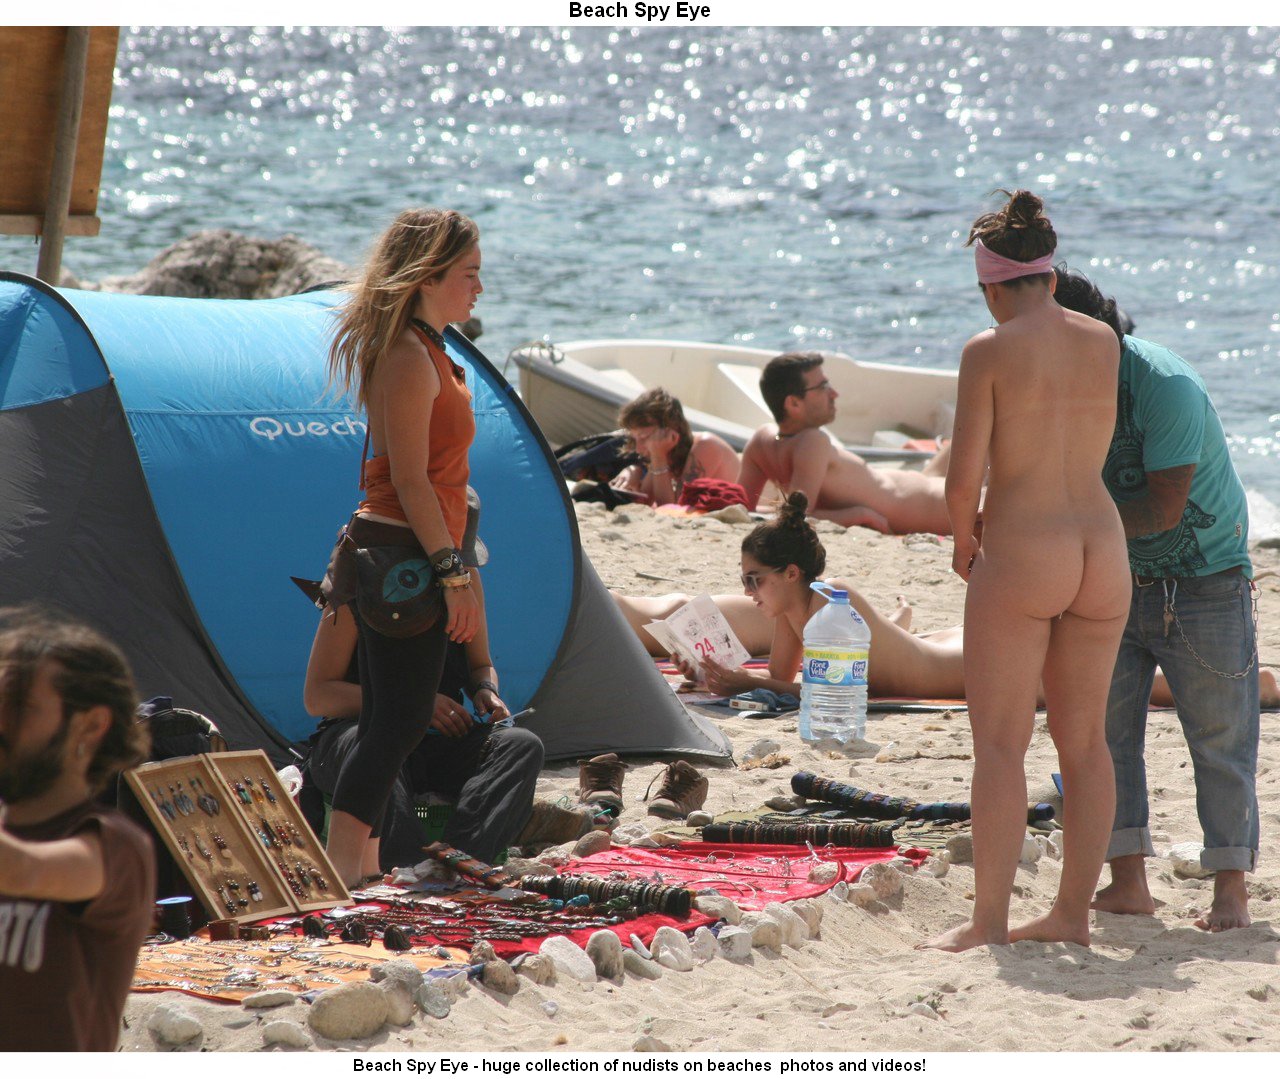 Nude Beaches Pics Nudist beach photos - adorable blonds and brunet.. View 6